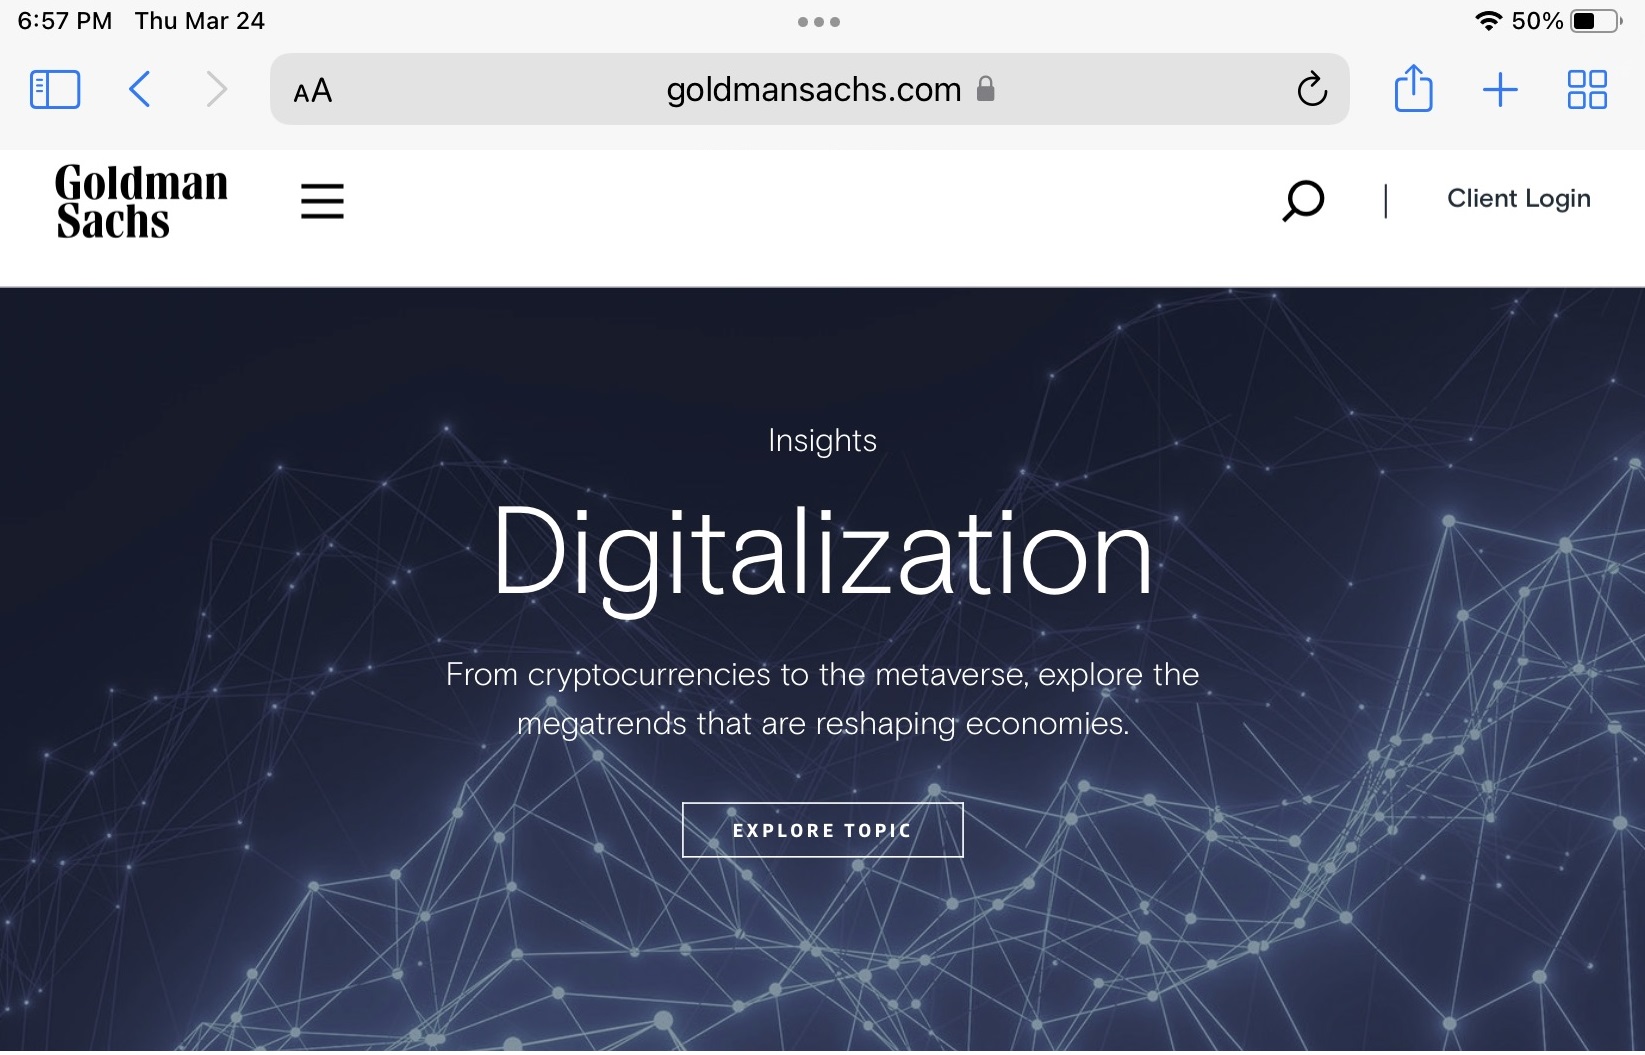 Goldman Sachs Features Cryptocurrencies, Metaverse, Digitalization on Its Homepage